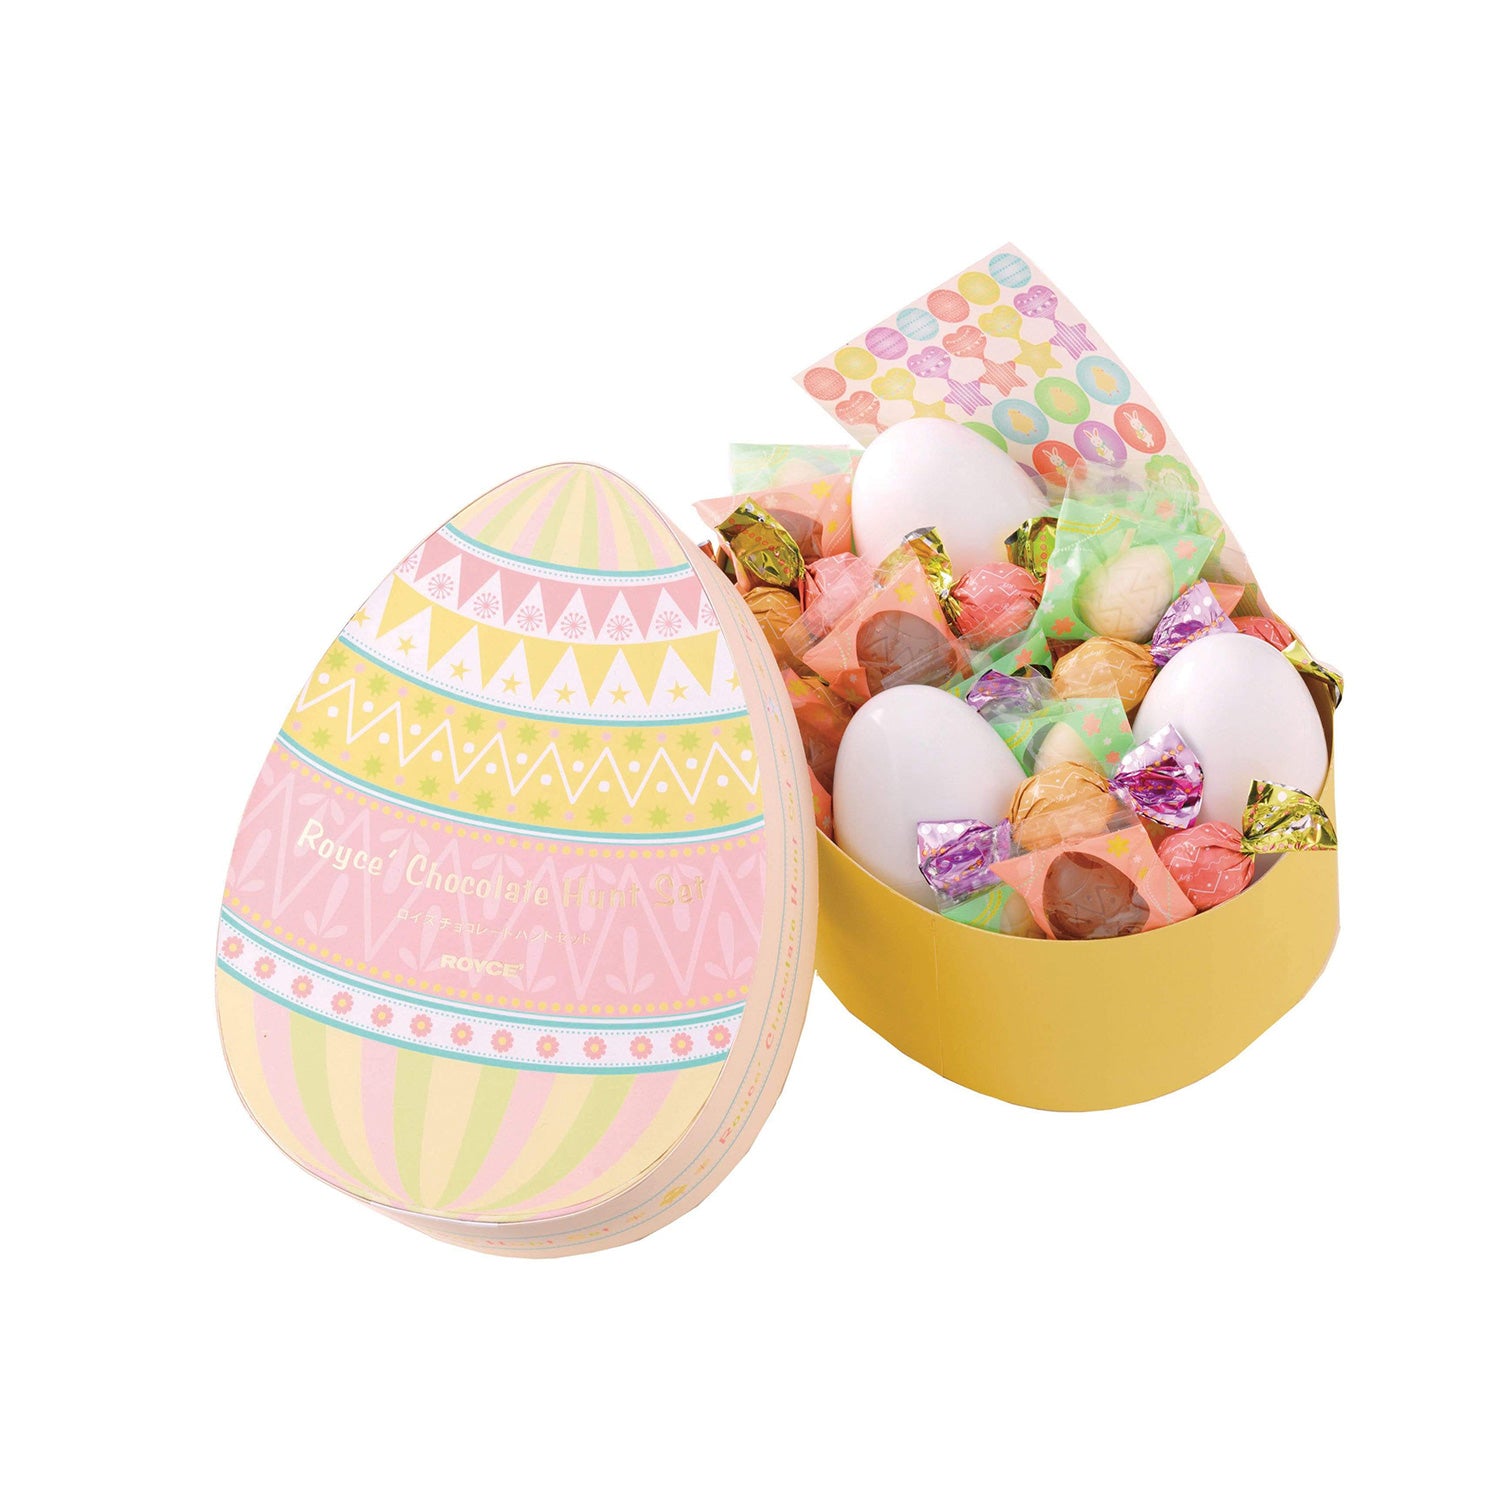 ROYCE' Chocolate - ROYCE' Chocolate Hunt Set - Image shows two egg-shaped boxes with a white background. Printed box on left has text saying ROYCE' Chocolate ROYCE'. Yellow box on right has plastic eggs, a sticker sheet, and a variety of confections in different colors and sizes.